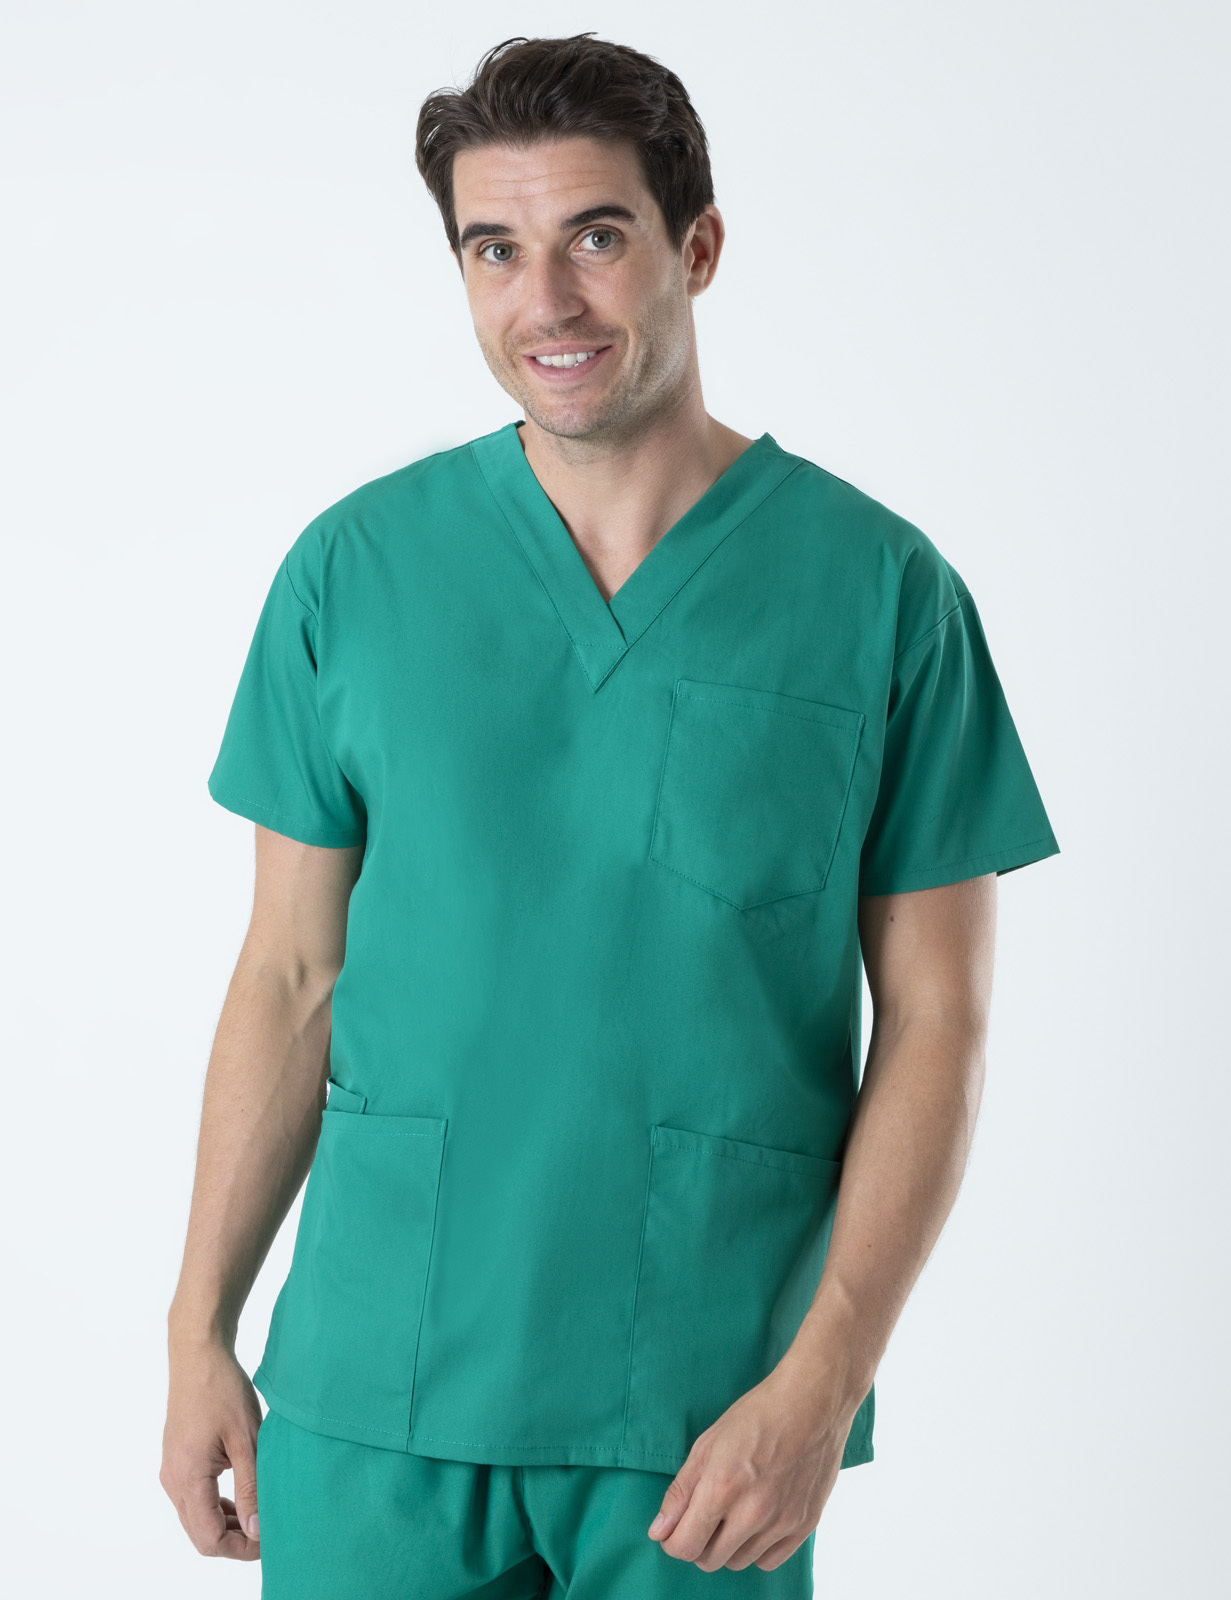 Canberra Hospital - ED Doctor (4 Pocket Scrub Top and Cargo Pants in Hunter incl Logos)